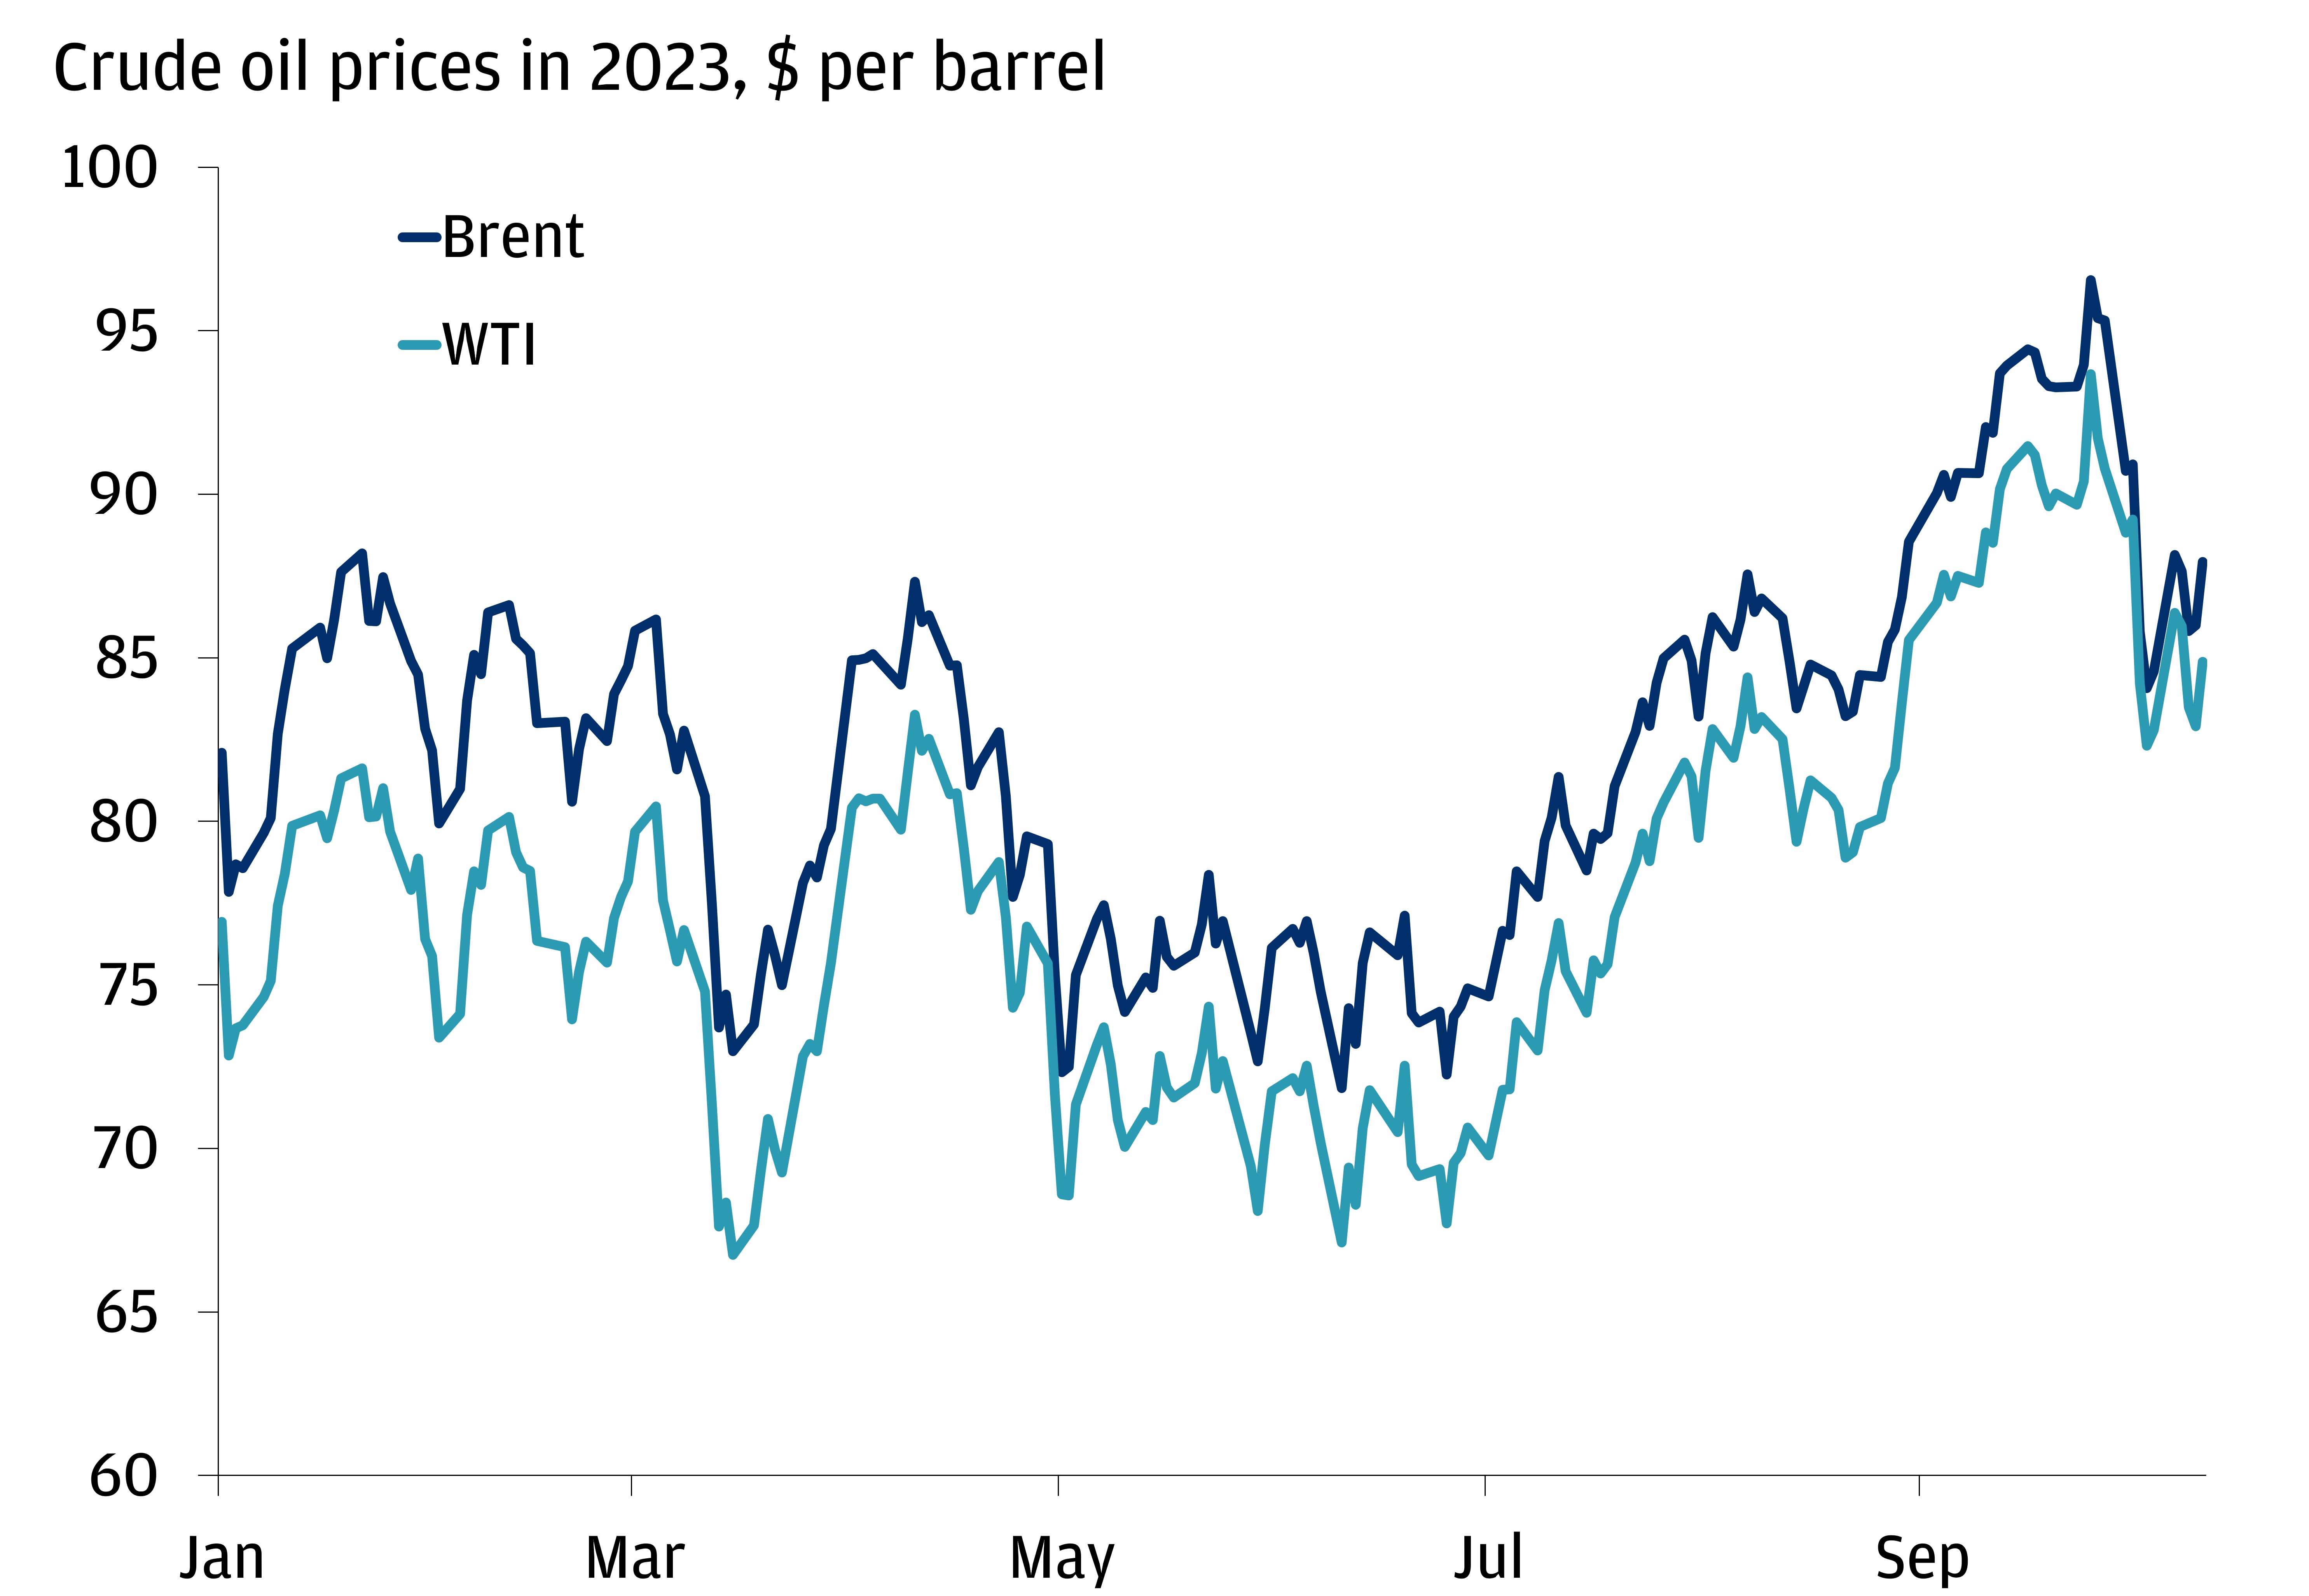 This line chart shows the price for Brent and WTI crude oil since the start of 2023 to today.